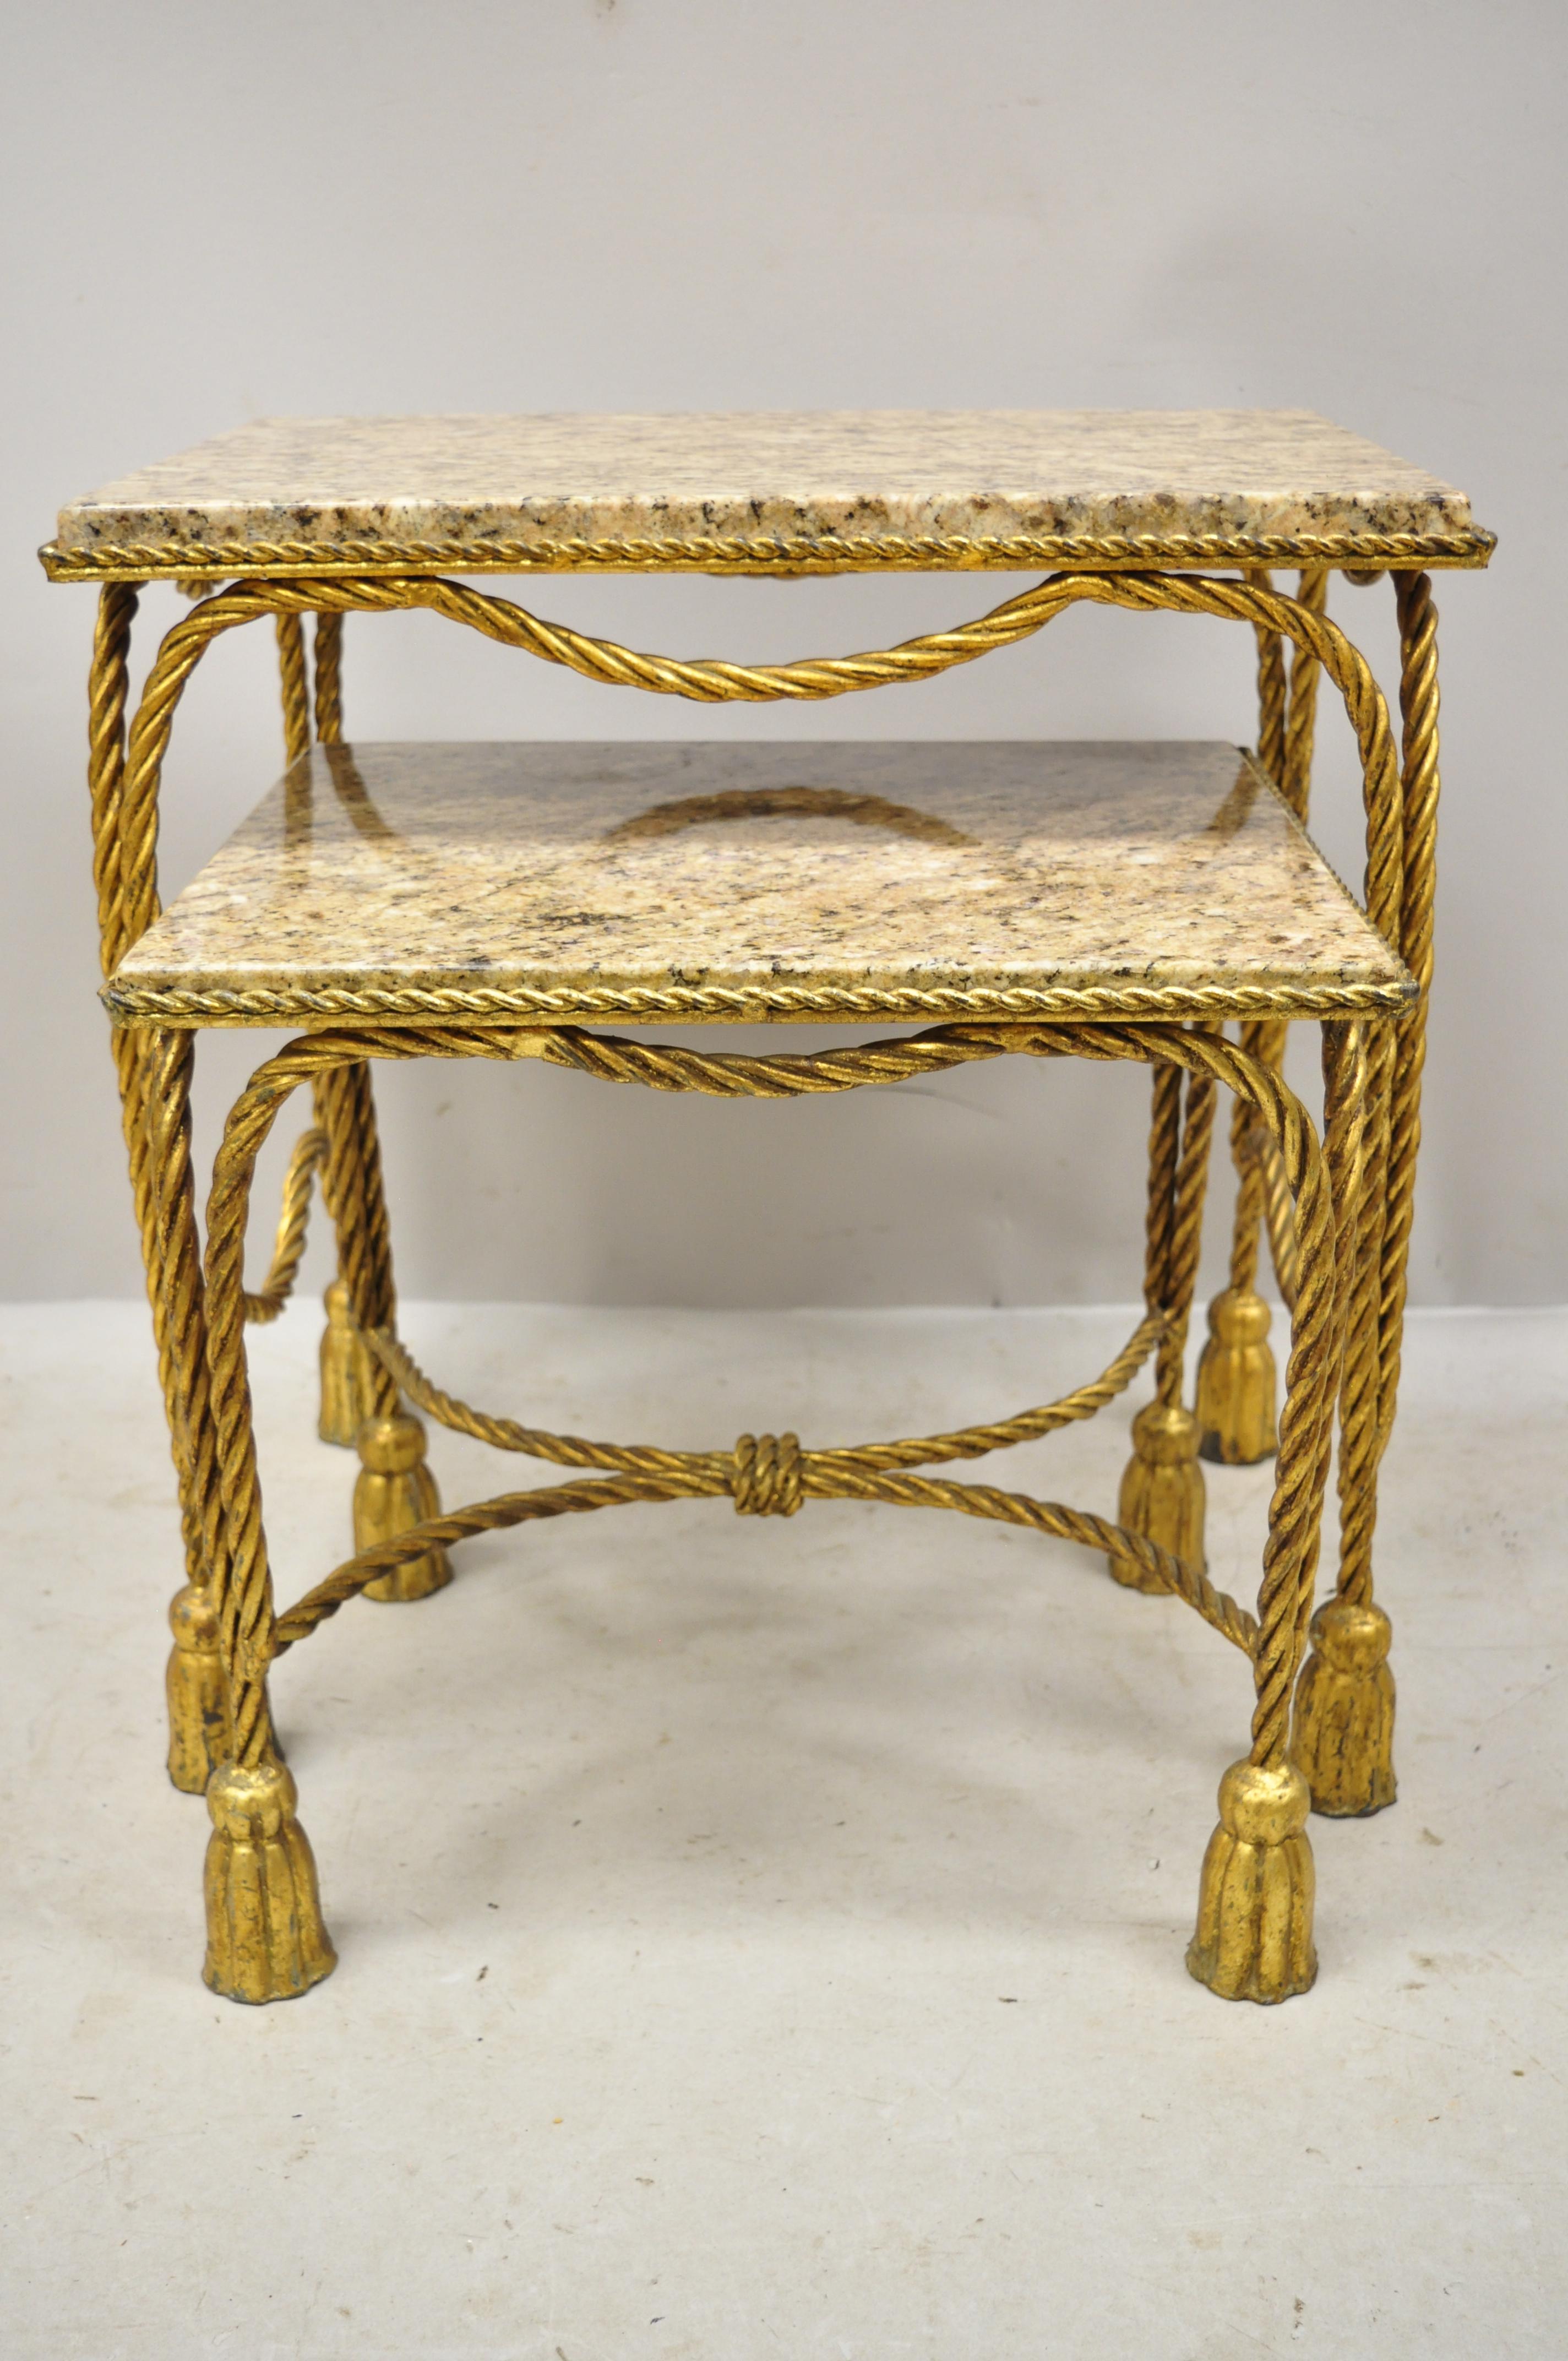 Mid-20th century Italian Hollywood Regency gold gilt iron rope tassel marble top nesting tables. Item features gold gilt iron bases, inset marble tops, rope and tassel design (2) nesting tables, very nice vintage item, great style and form, circa